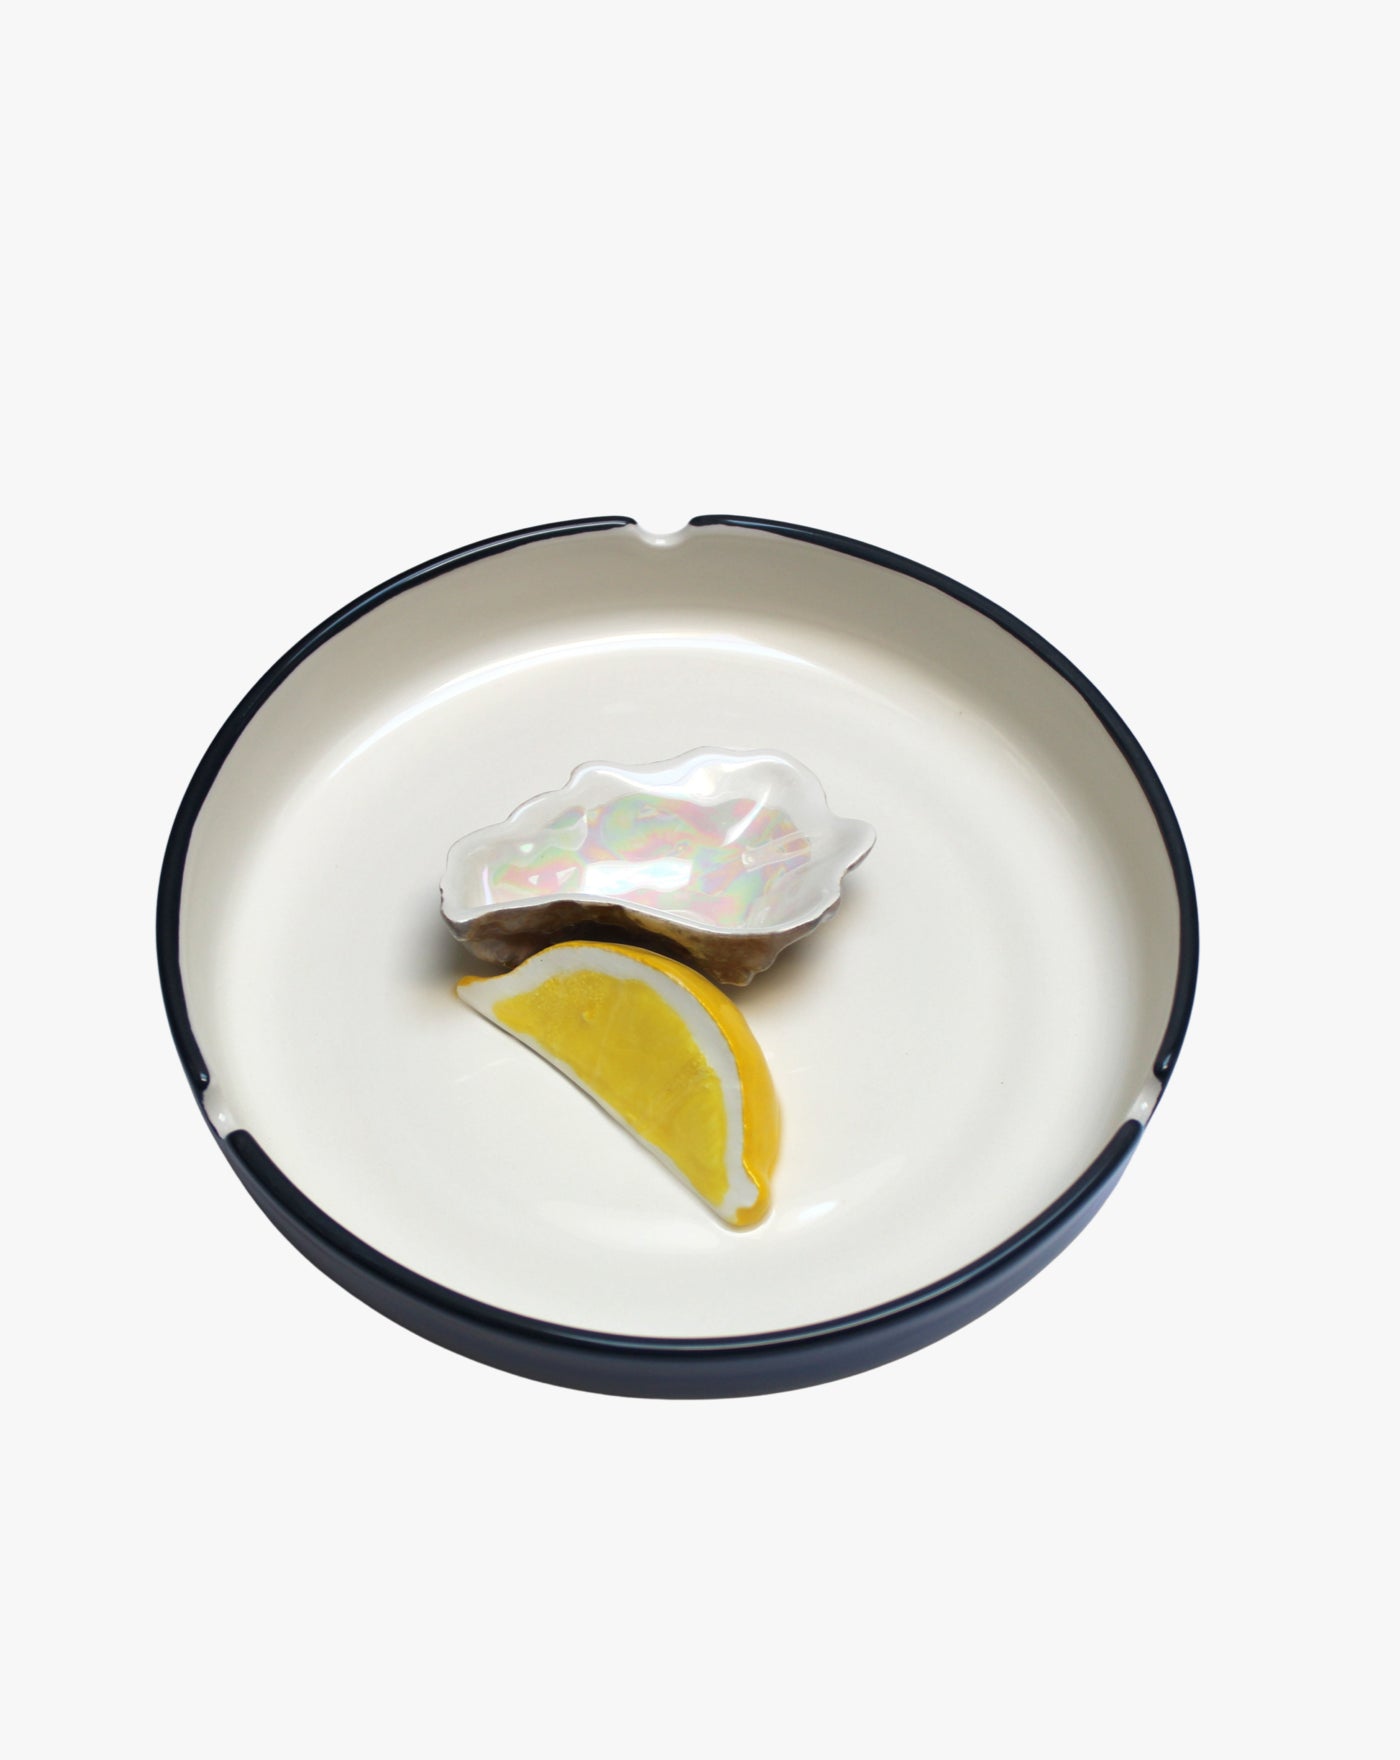 A single fresh oyster accompanied by a lemon wedge is served in a Villa Arev Plaisir Solitaire Ashtray against a white background.